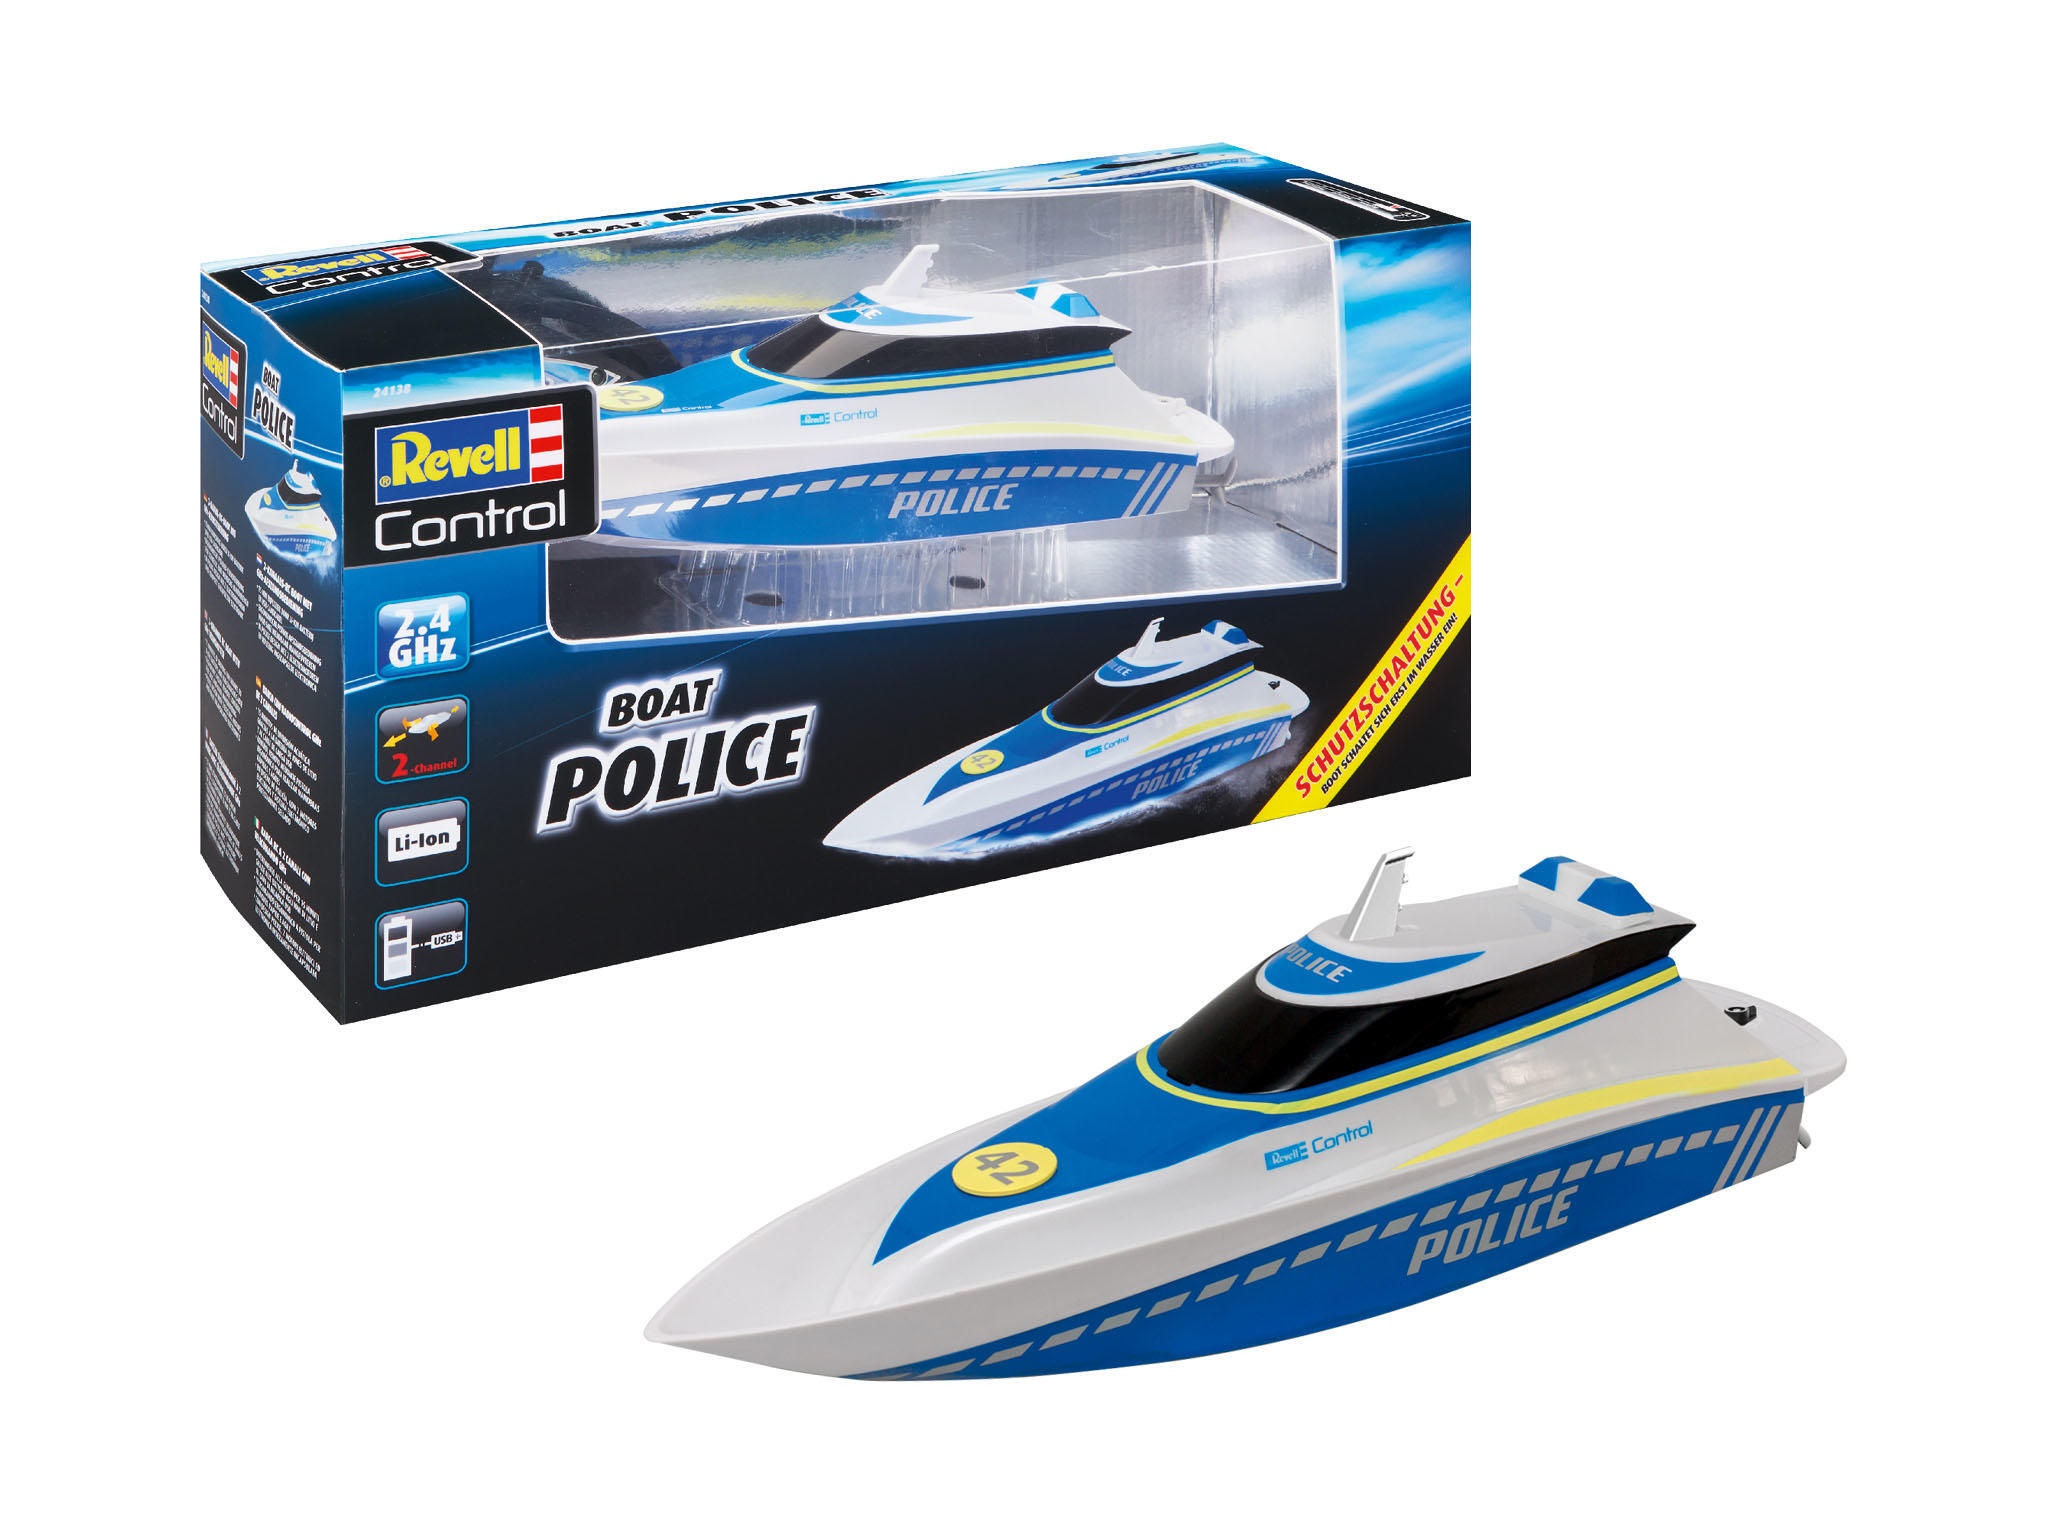 Revell 24138 RC Boot "Police" Revell Control Ferngesteuertes Polizeiboot